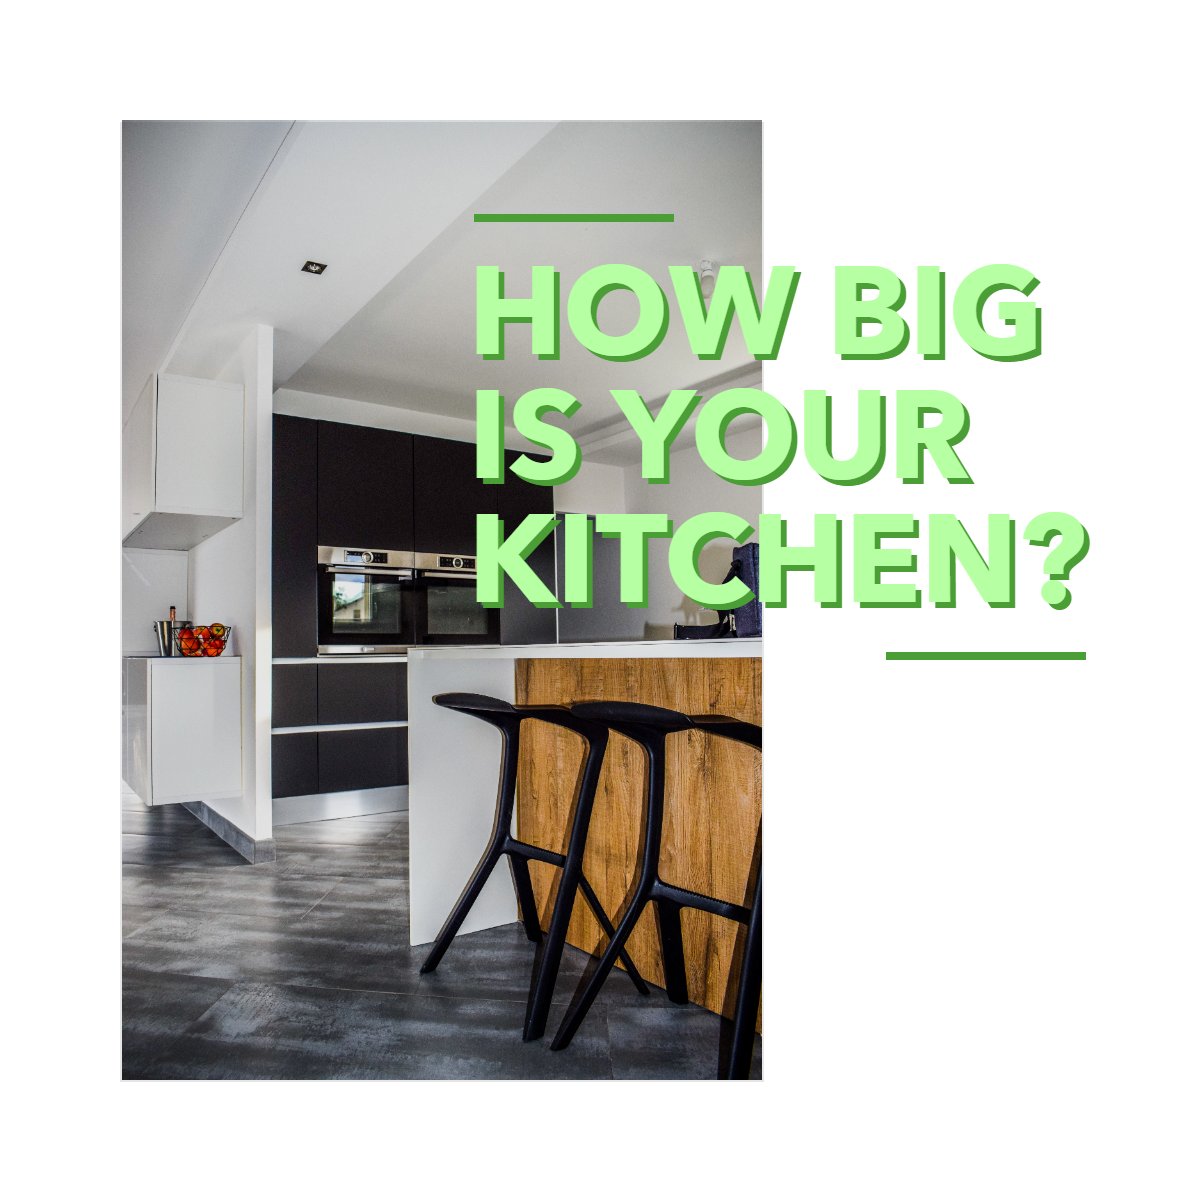 In the US the average kitchen size for single homes is 161 square feet.

How big is your kitchen? Tell us in the comments!  👇

#realestate #kitchensize #kitchen #homes
 #RealestateAppleton #Appletonwisconsin #AppletonWisconsinRealEstate #CharlesRobbinsRealtor